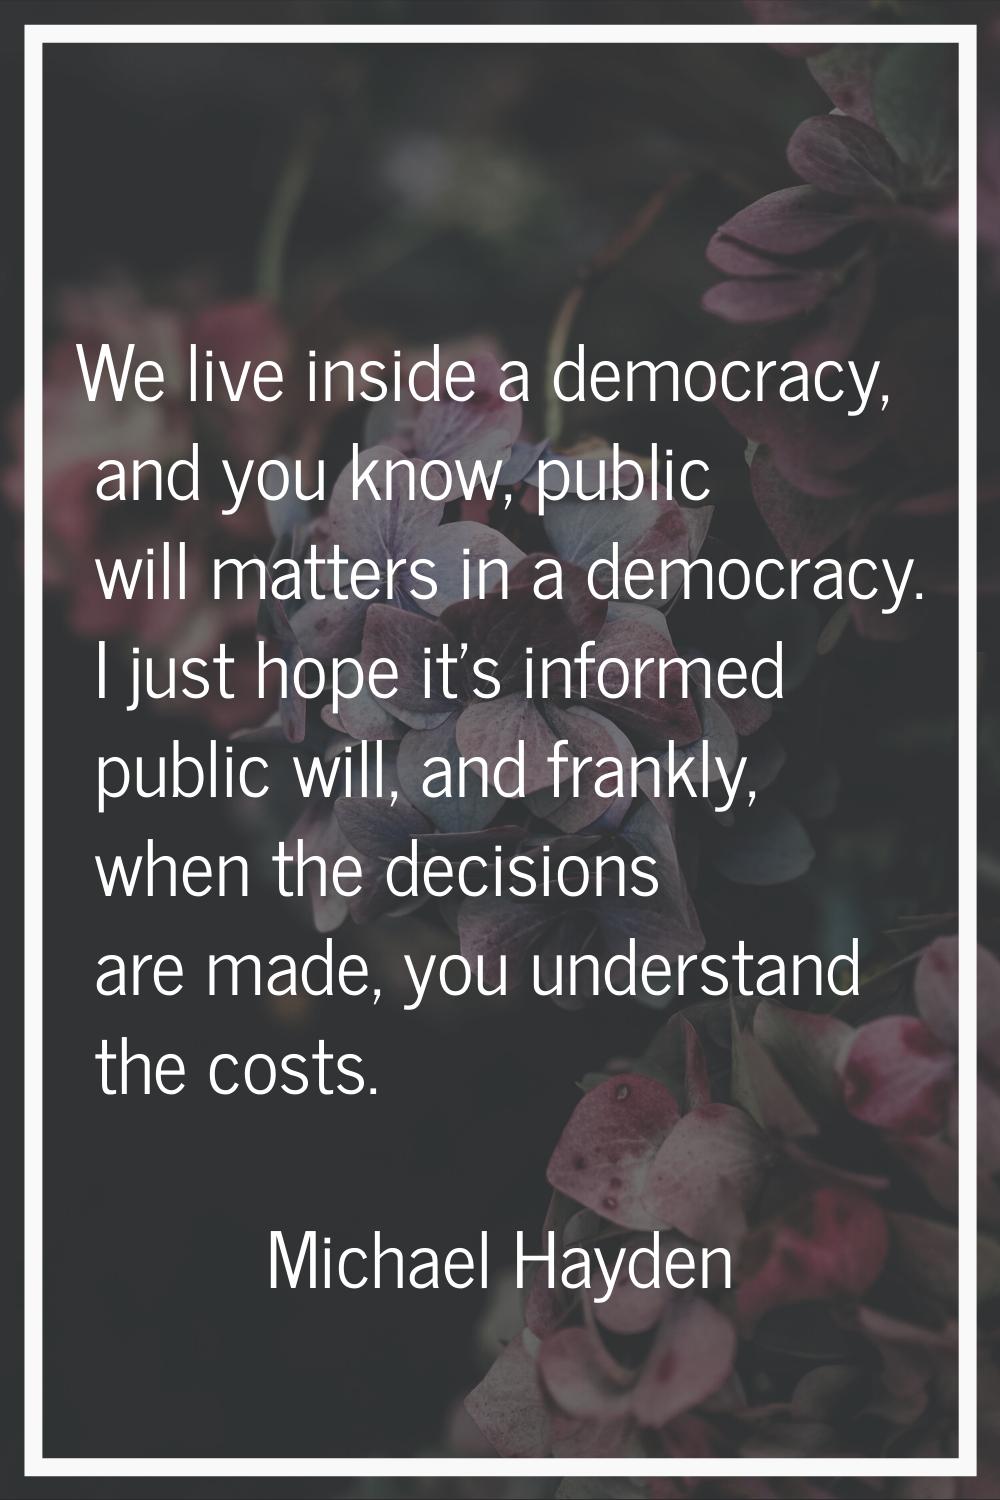 We live inside a democracy, and you know, public will matters in a democracy. I just hope it's info